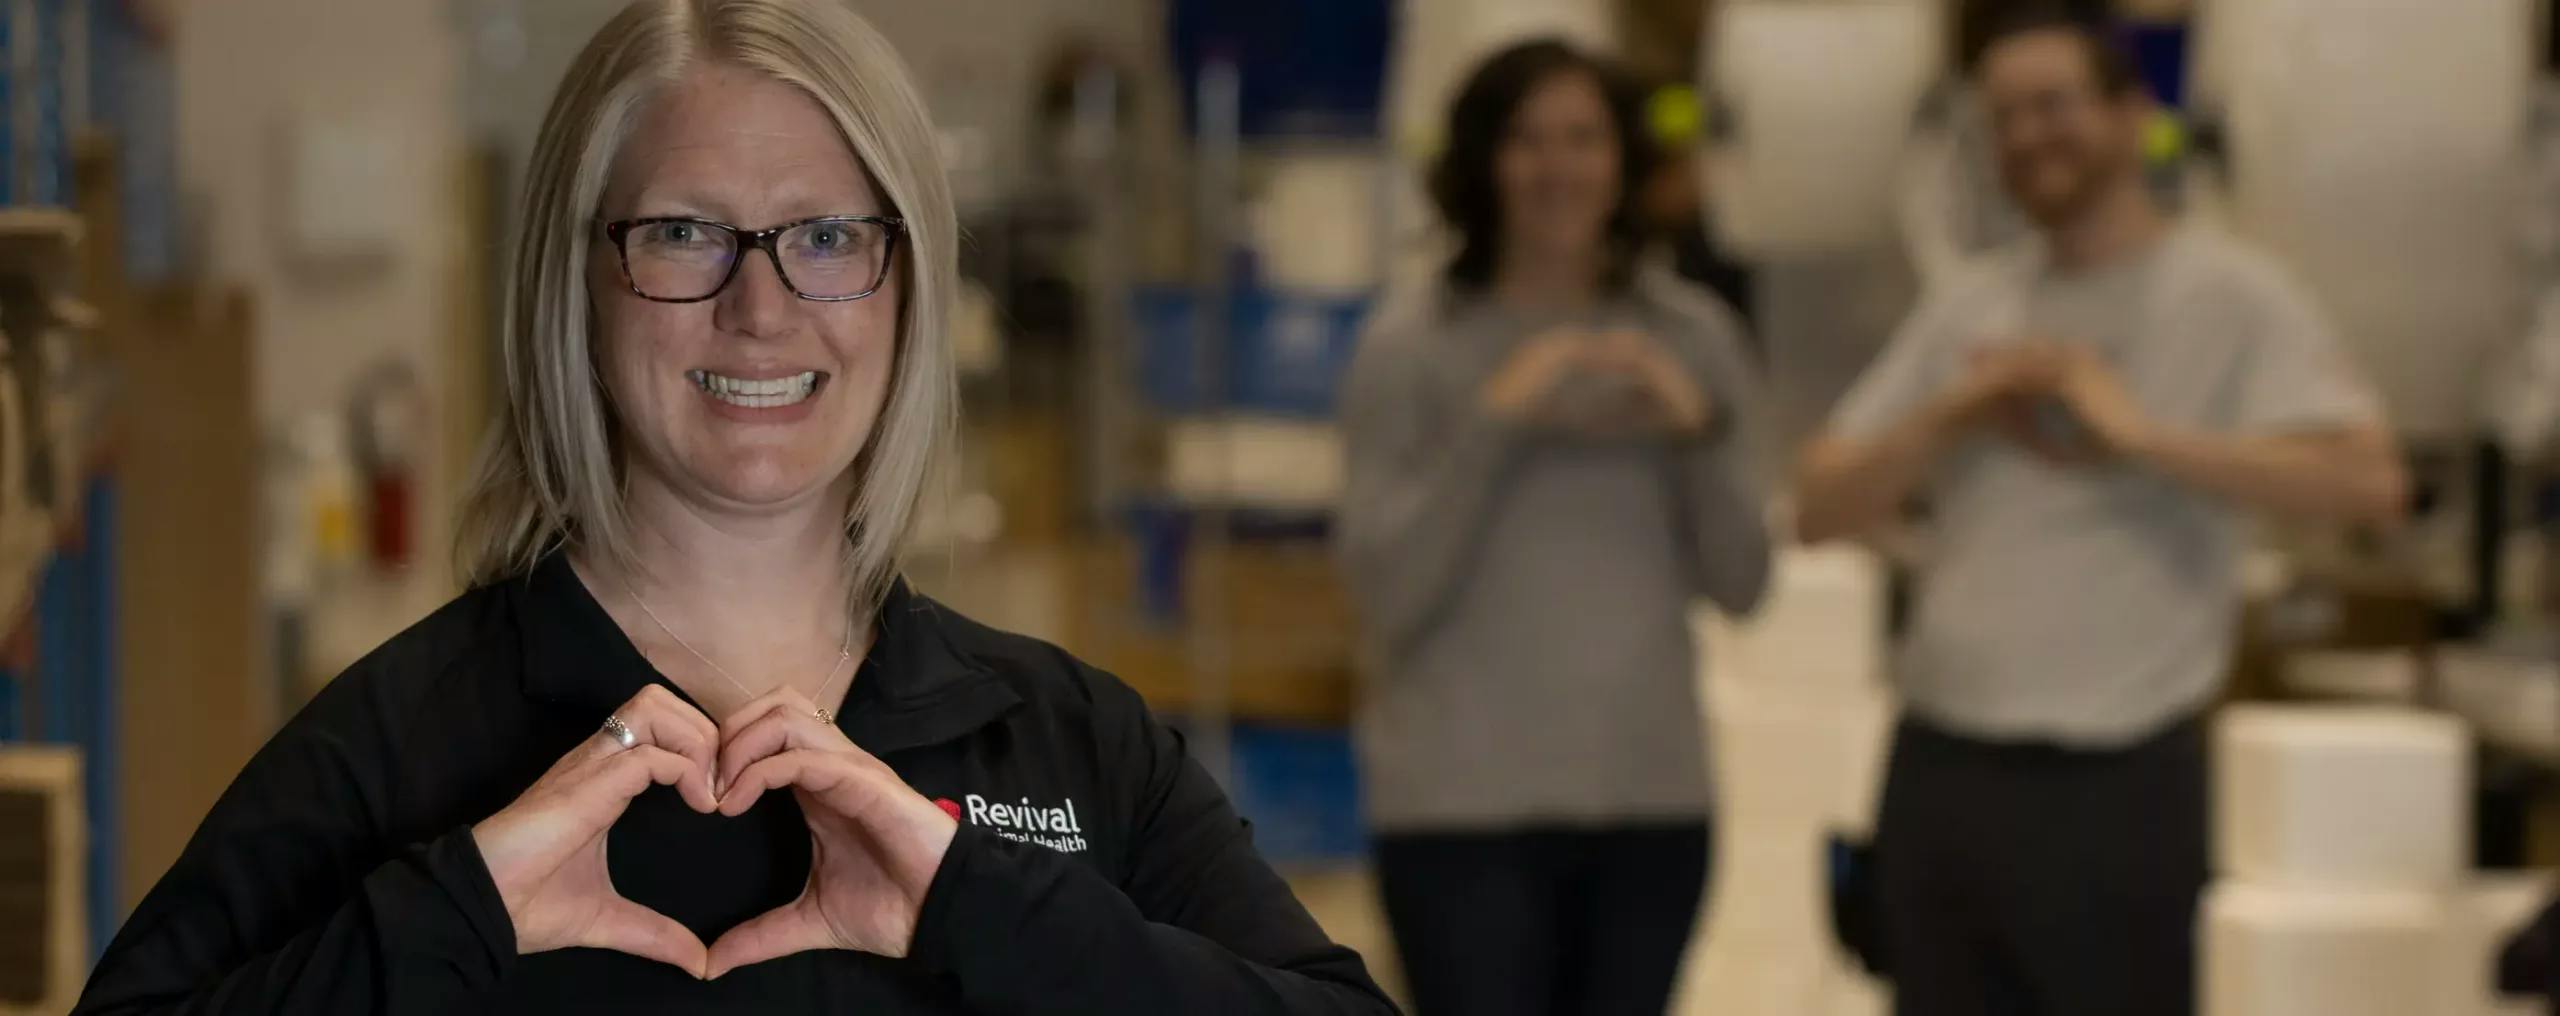 Blonde woman with glasses wearing a black shirt that says Revival makes a heart shape with her hands with a man and a woman behind her in gray shirts are making a heart with their hands.